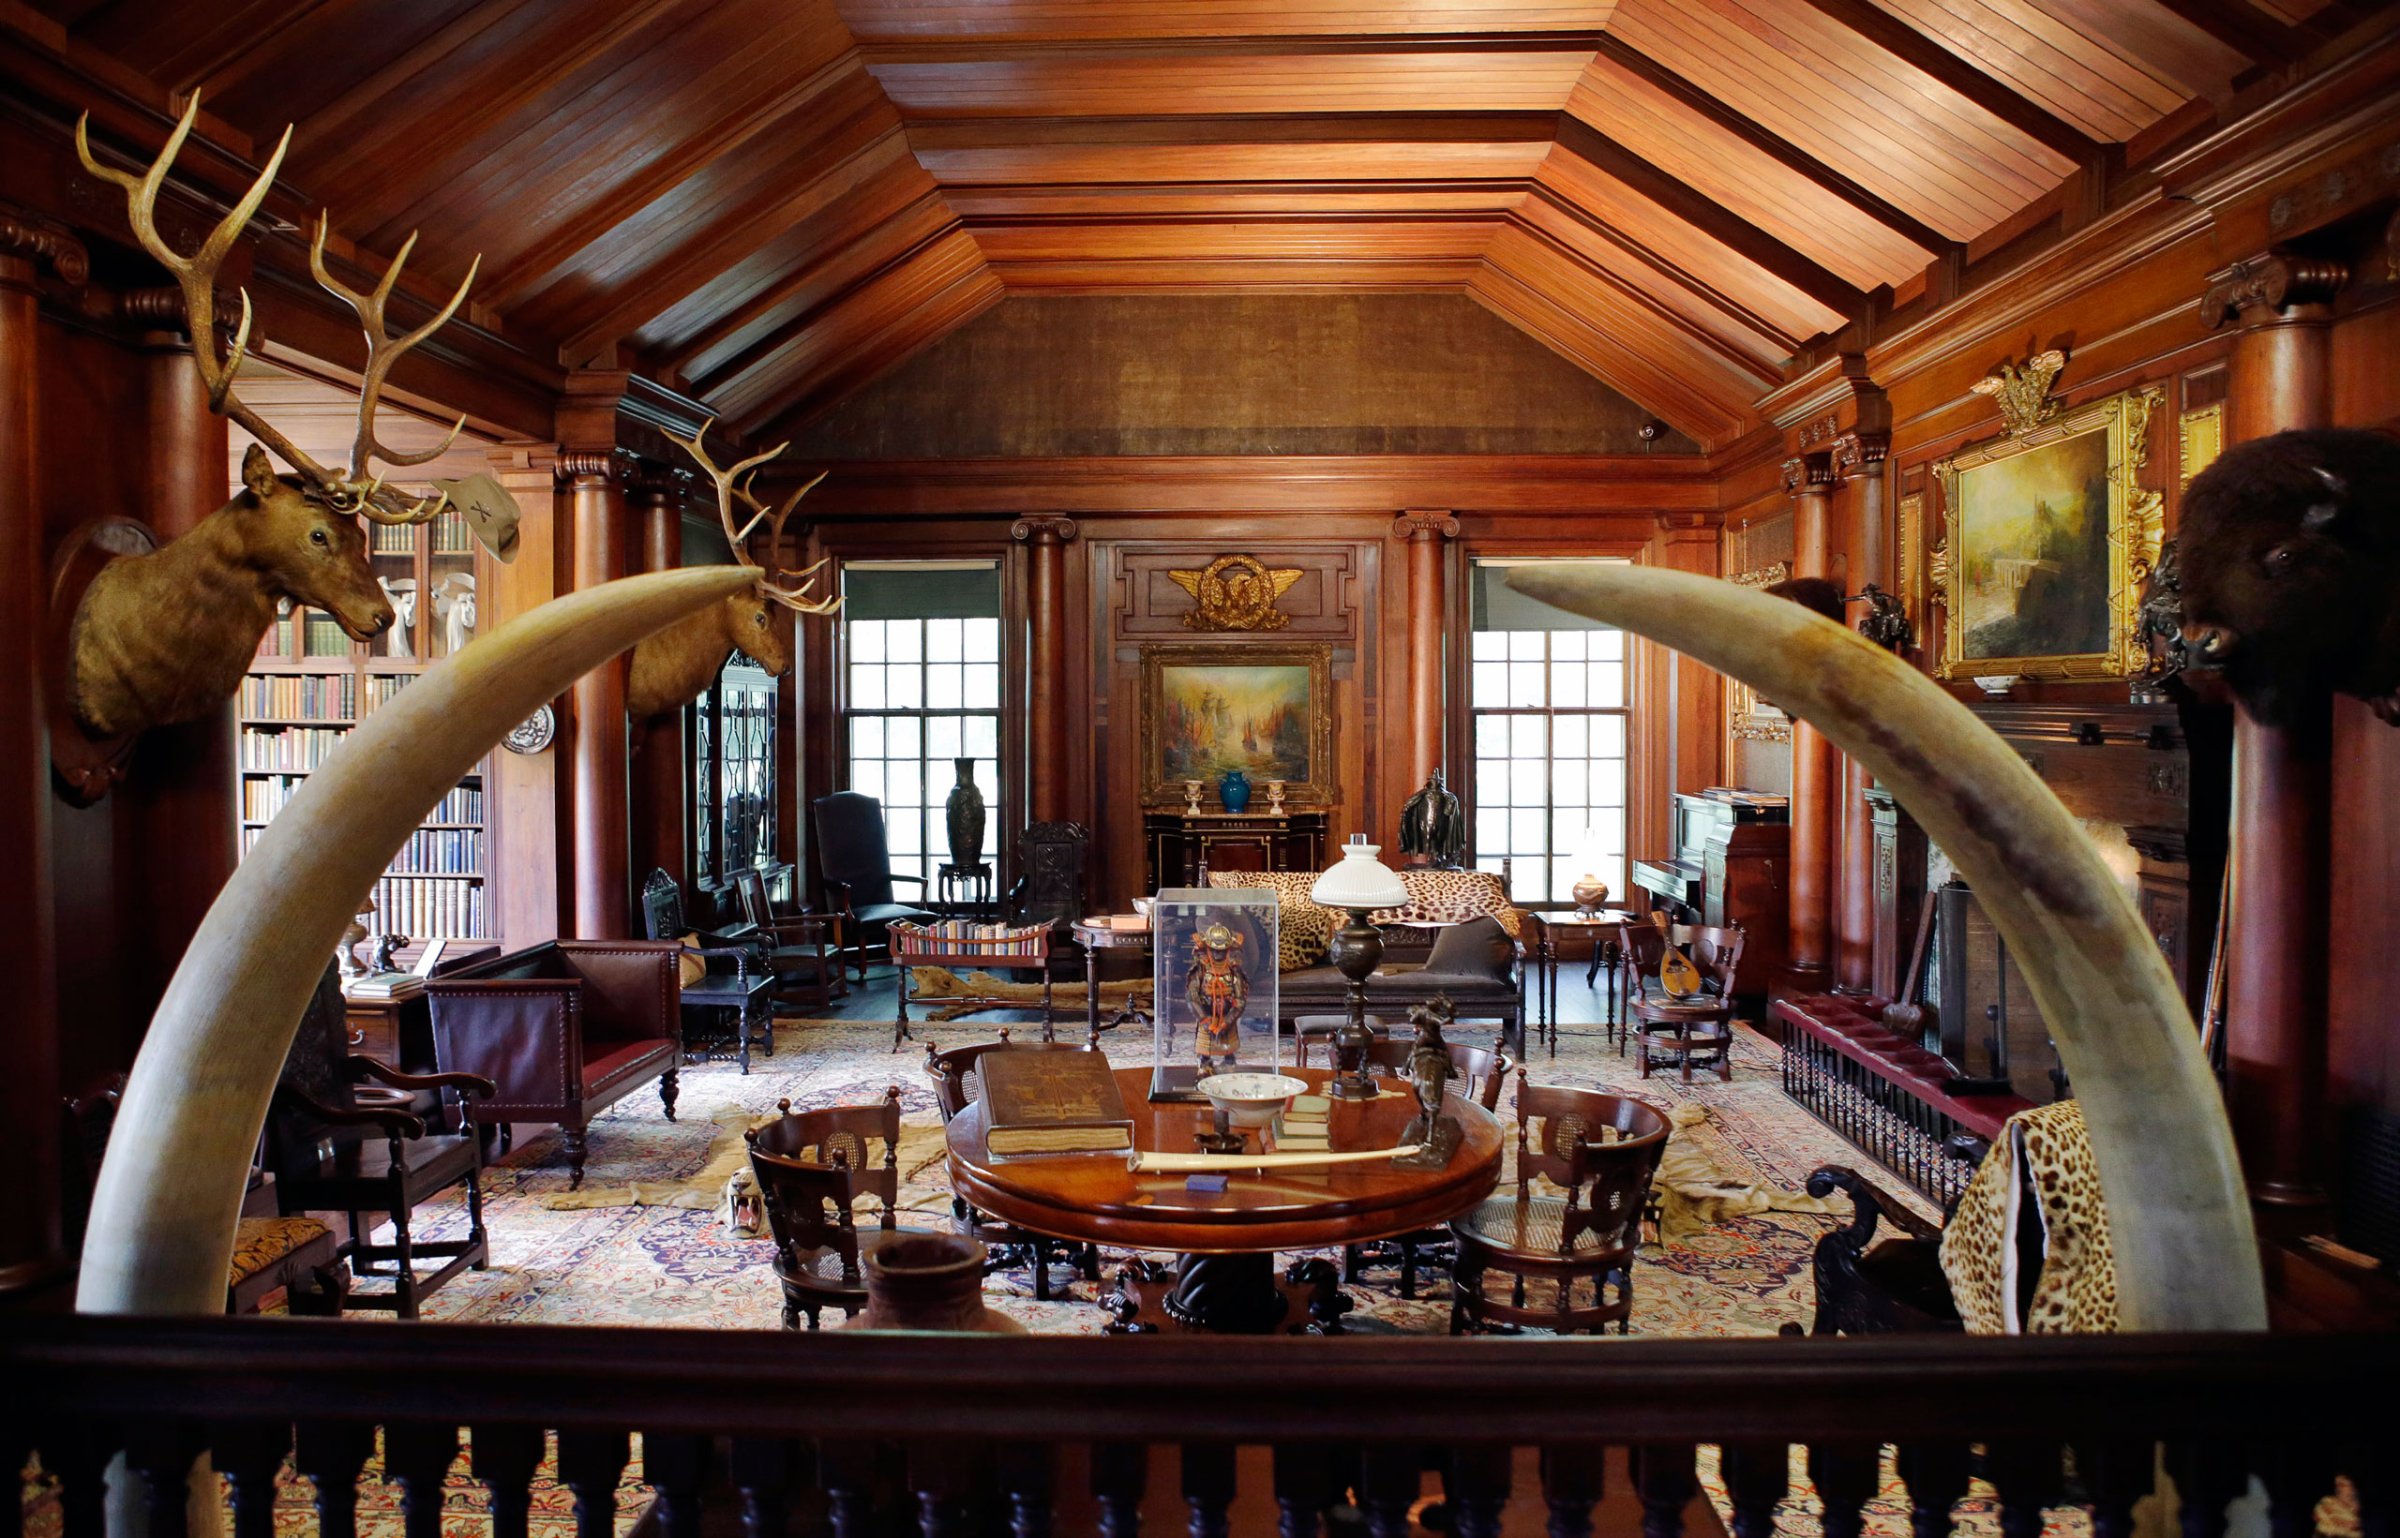 In this June 9, 2015, photo, elk and bison heads along with mementos President Theodore Roosevelt received adorn the North Room, the 26th president's "trophy room," at Sagamore Hill, his summer White House in Oyster Bay, N.Y. Sagamore Hill reopens July 12 after a $10 million, four-year renovation by the National Park Service. (AP Photo/Kathy Willens)